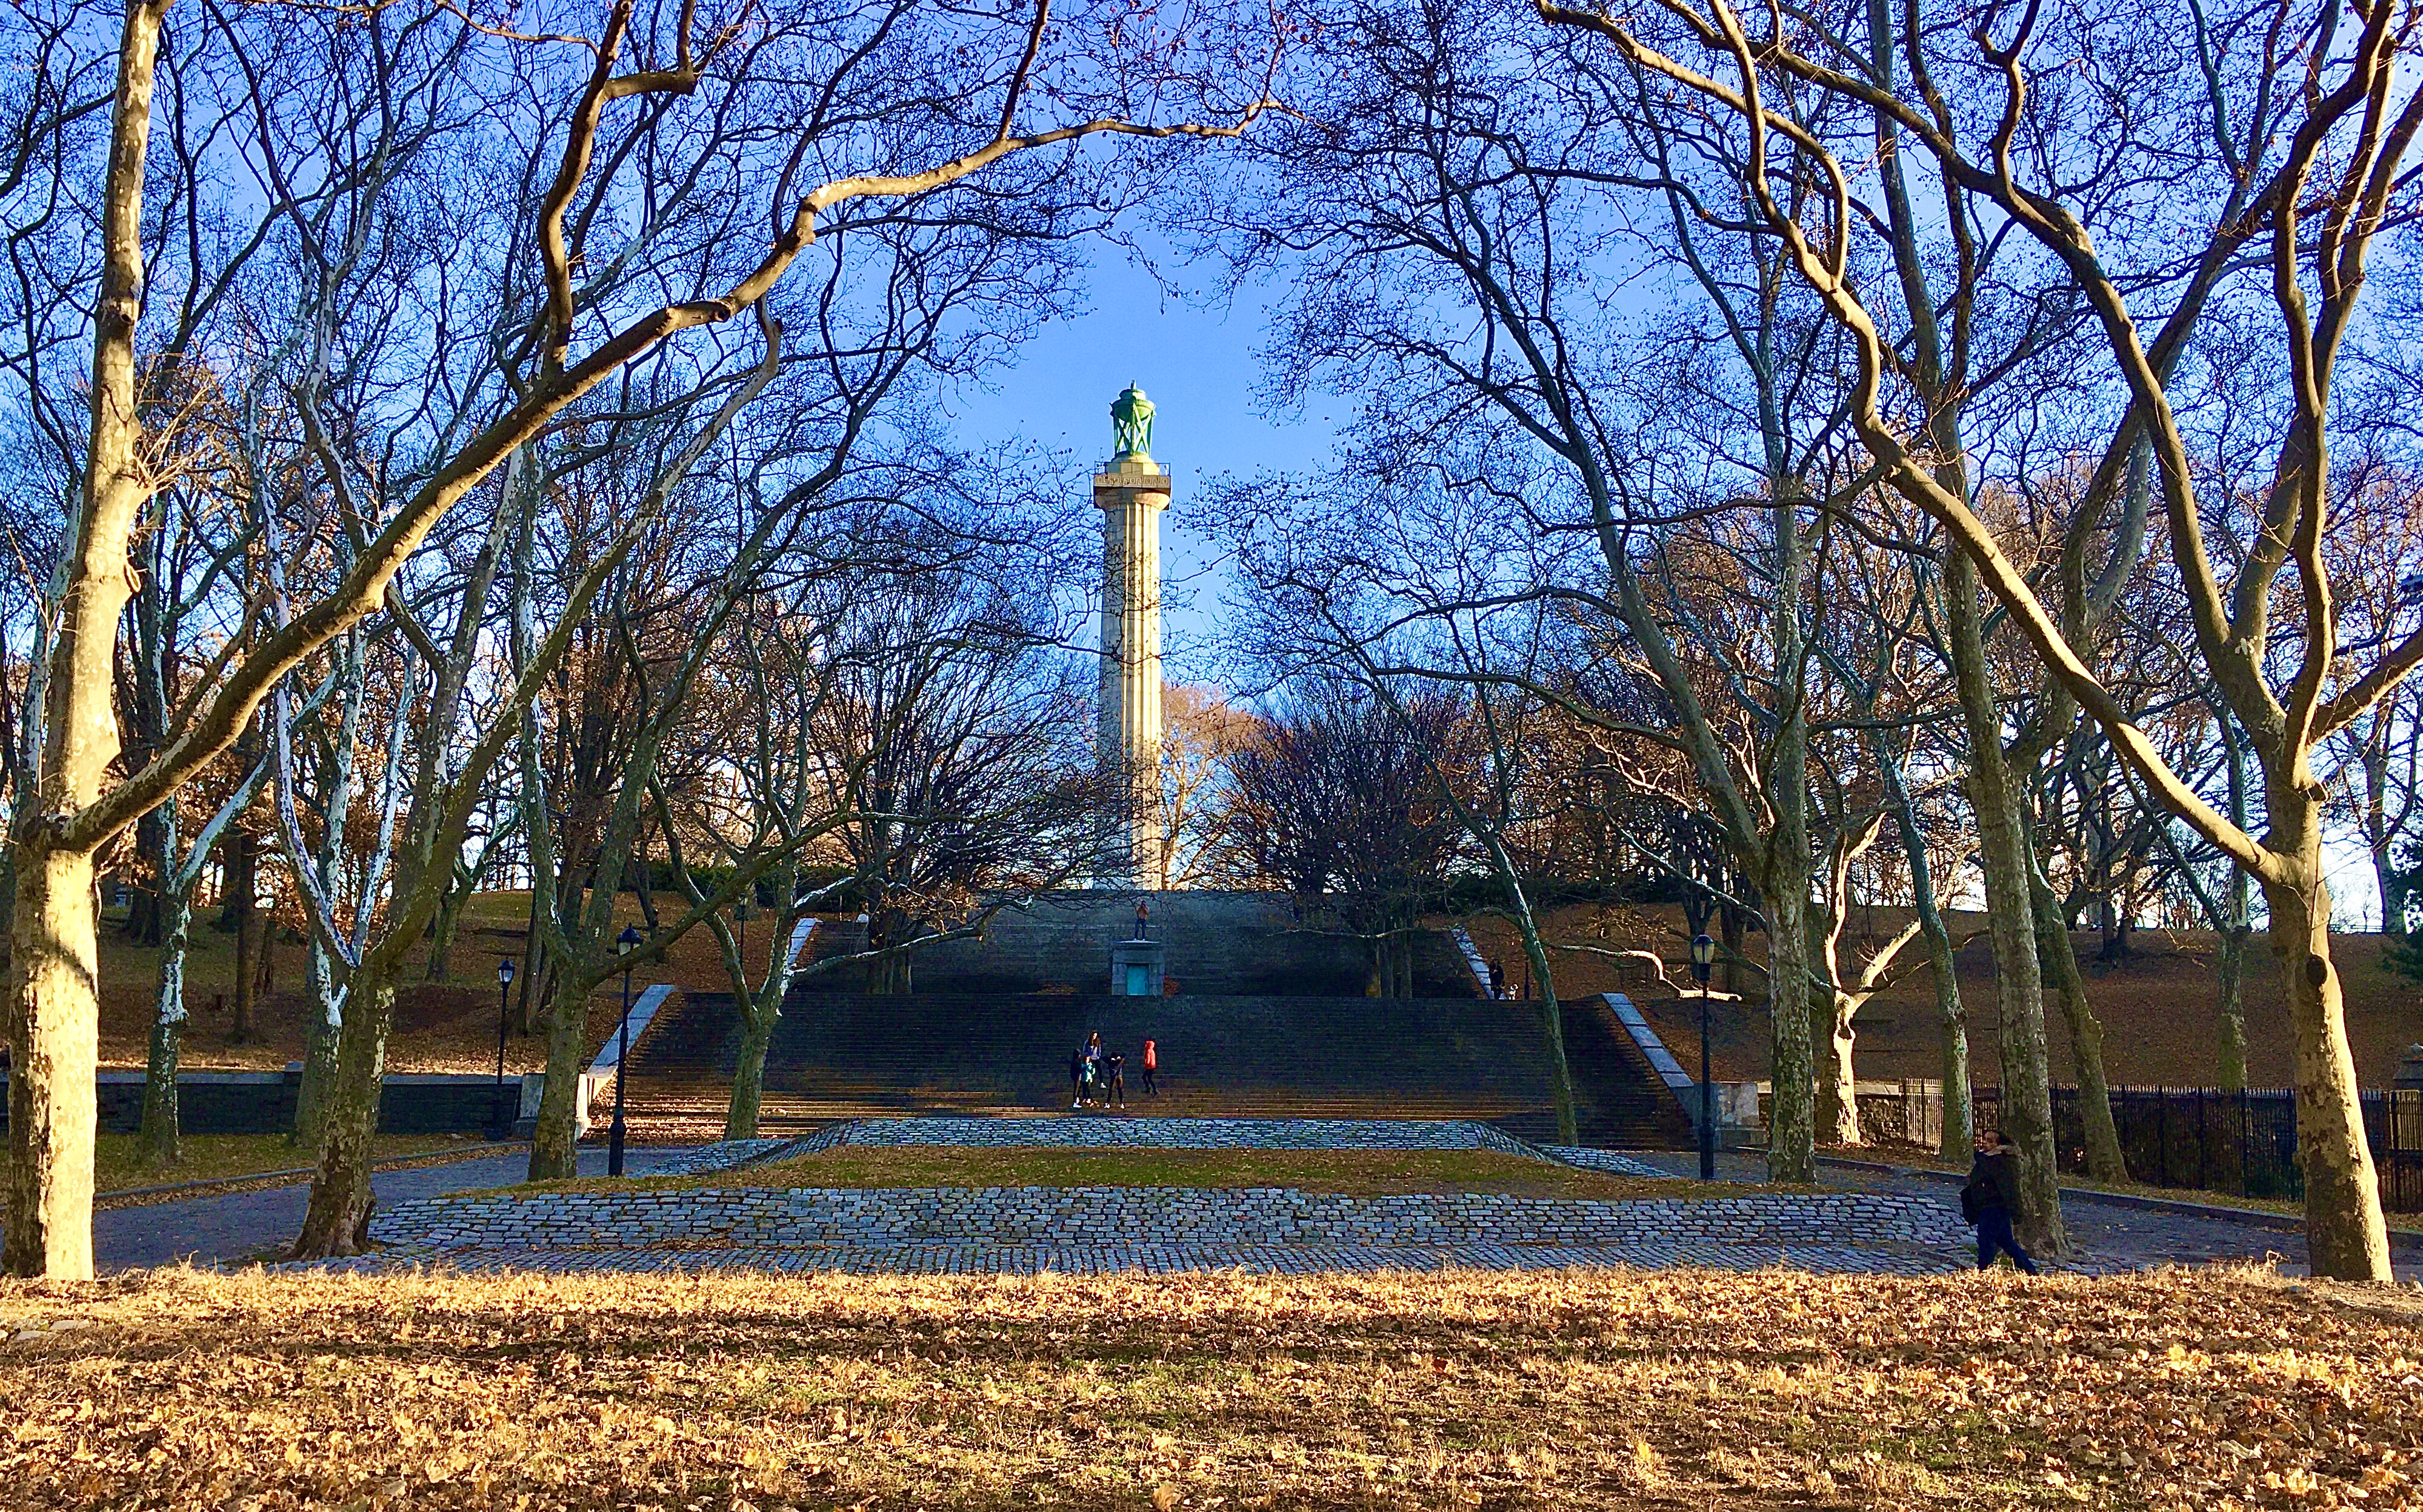 The Parks Department plans to destroy mounds designed by landscape architect A.E. Bye, seen here in the foreground beneath the Prison Ship Martyrs’ Monument. Photo: Lore Croghan/Brooklyn Eagle